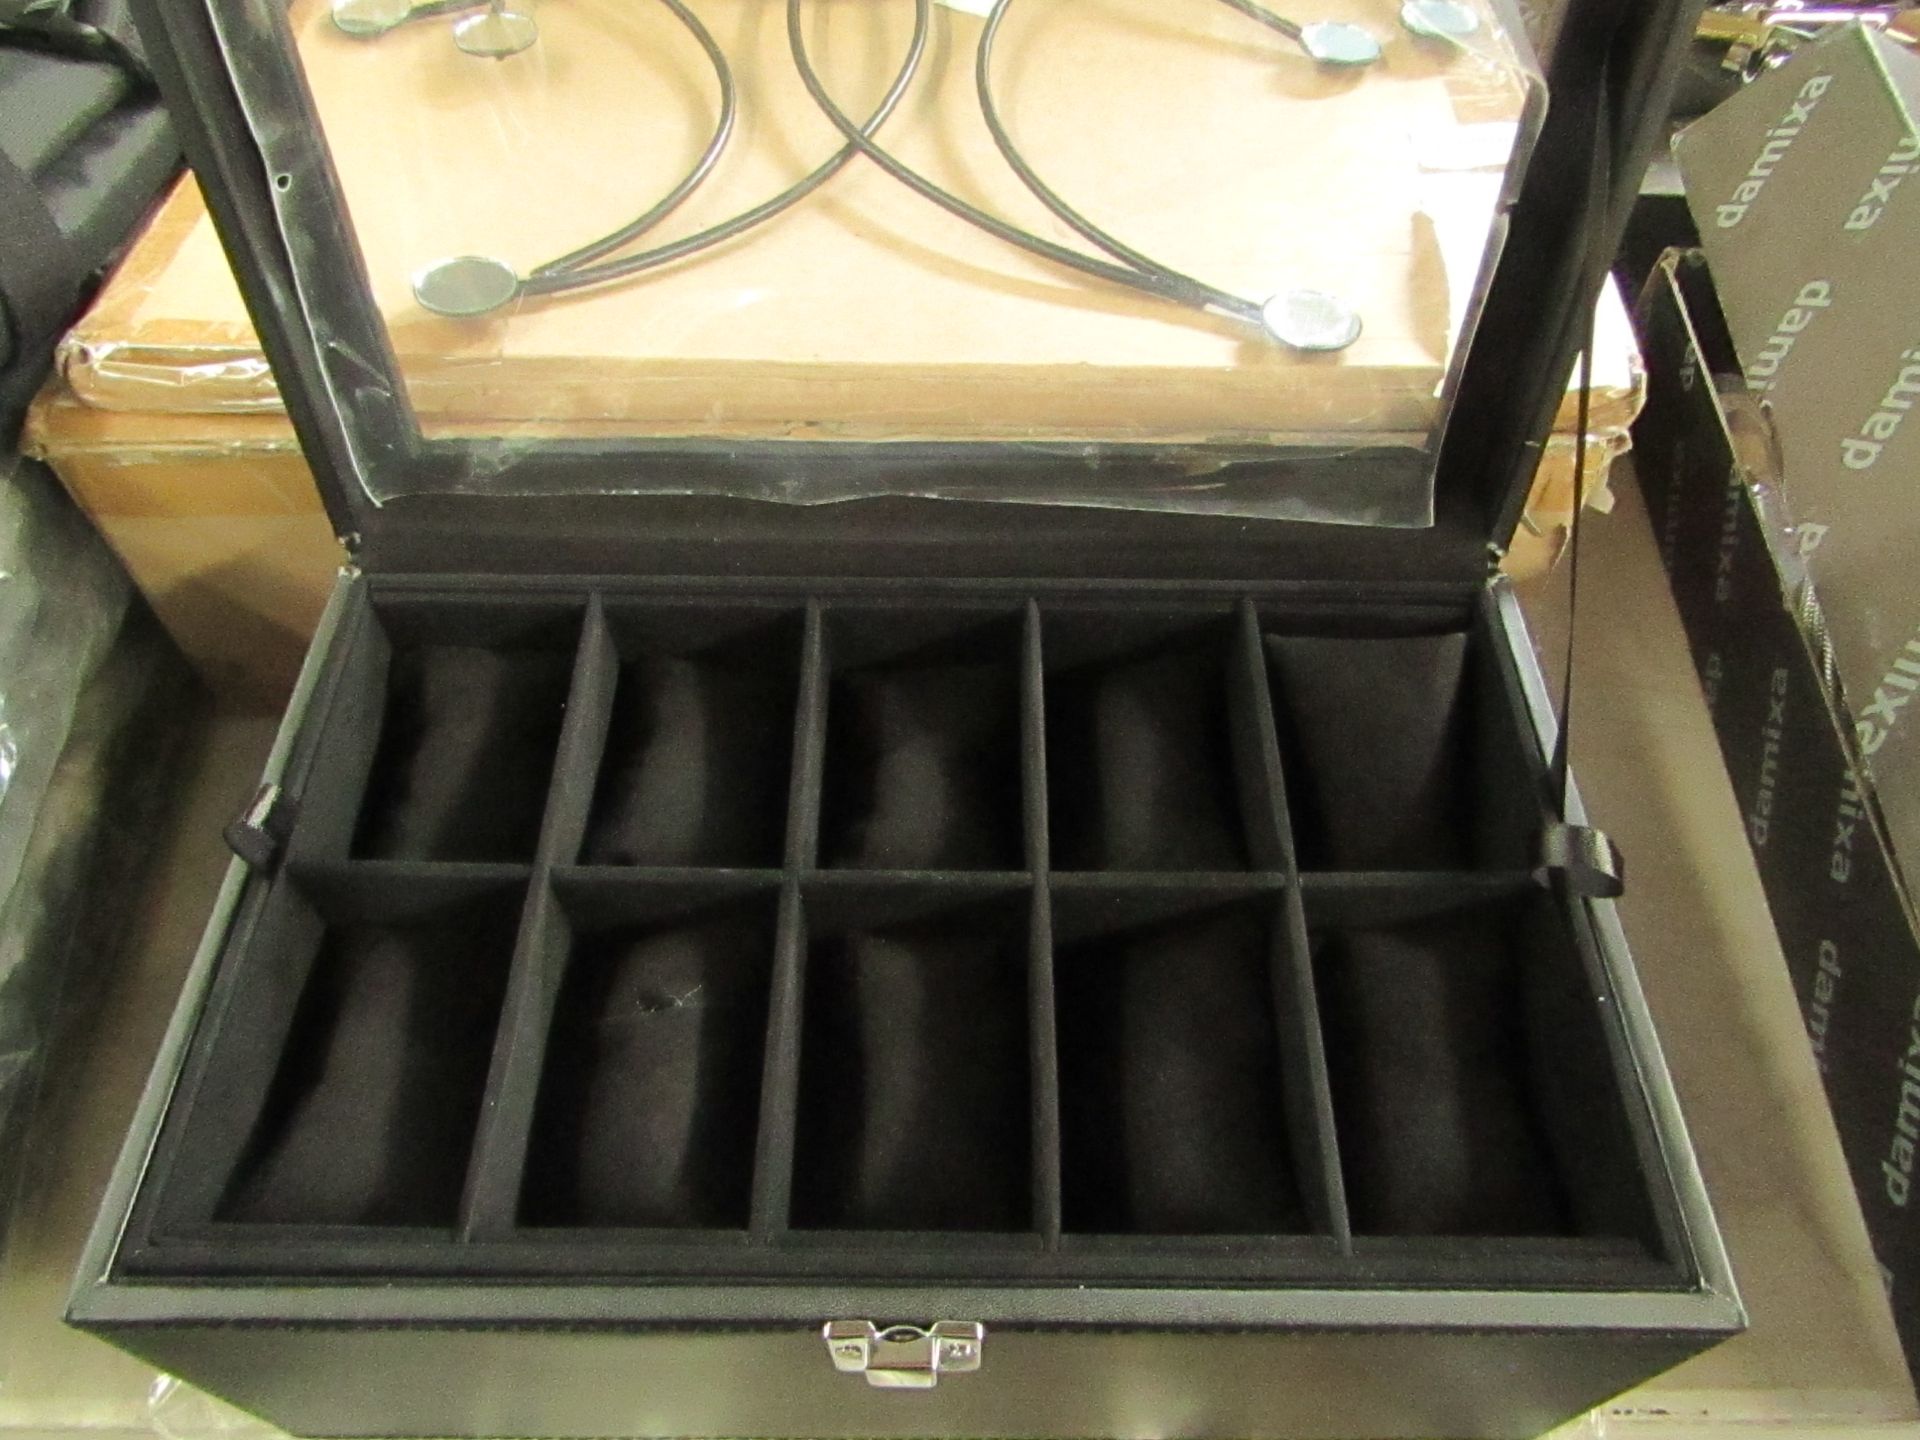 Eaglemoss - Black 10-Compartment Jewellery Case - Unchecked & Boxed.